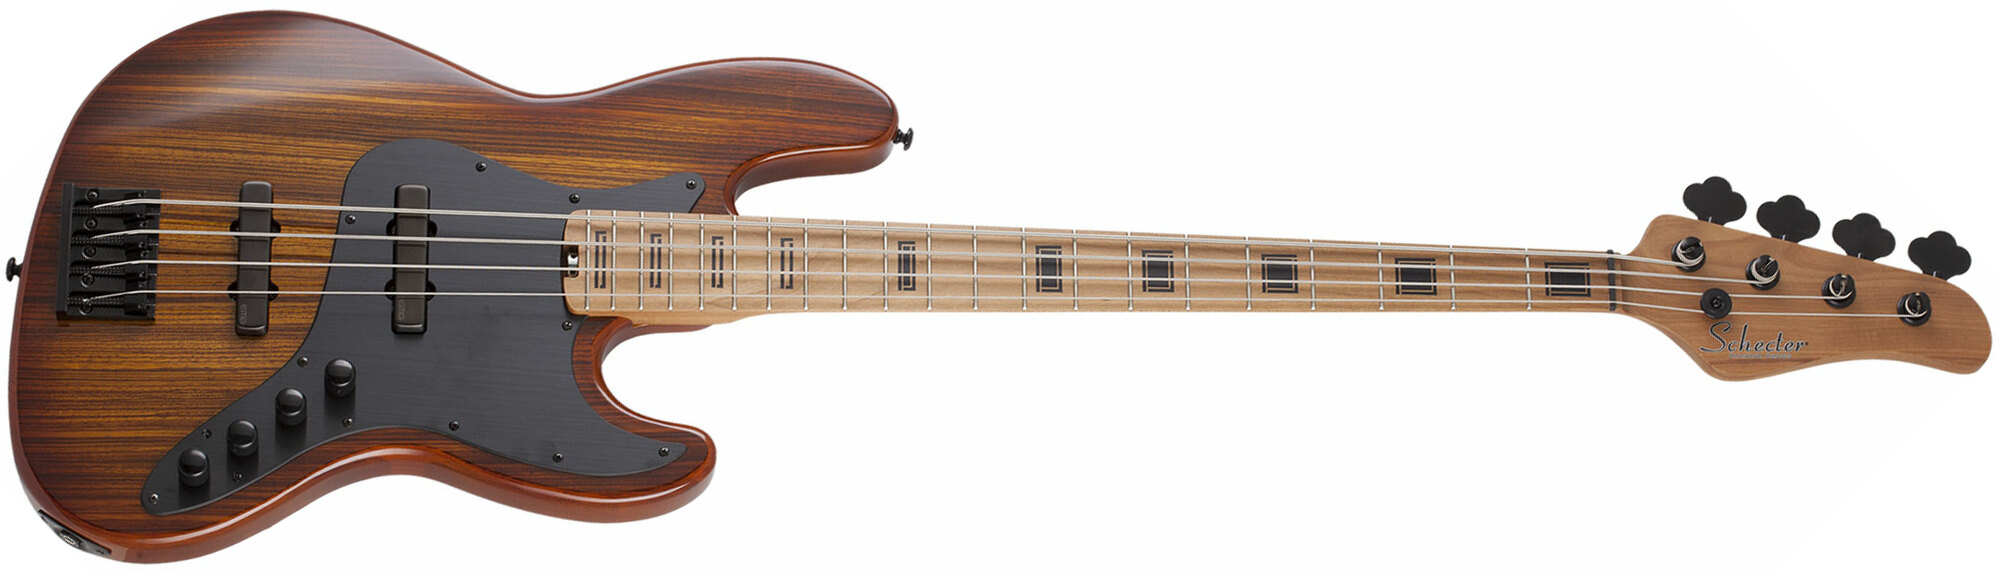 Schecter J-4 Exotic Emg Active Mn - Faded Vintage Sunburst - Solidbody E-bass - Main picture